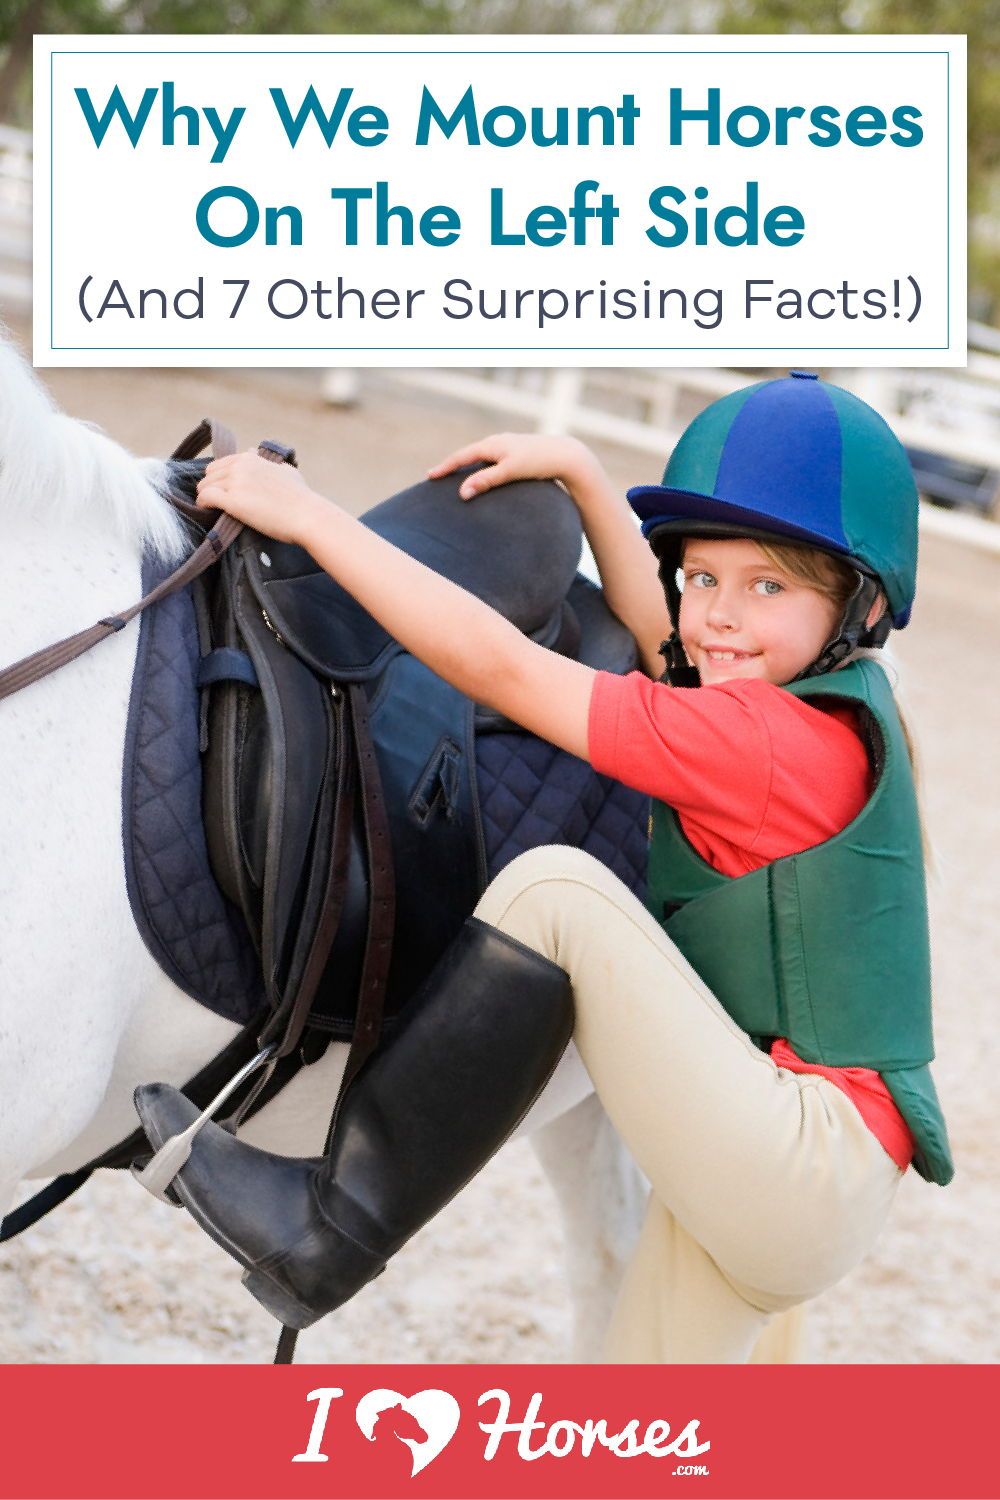 Why We Mount Horses On The Left Side. (And 7 Other Surprising Facts!)